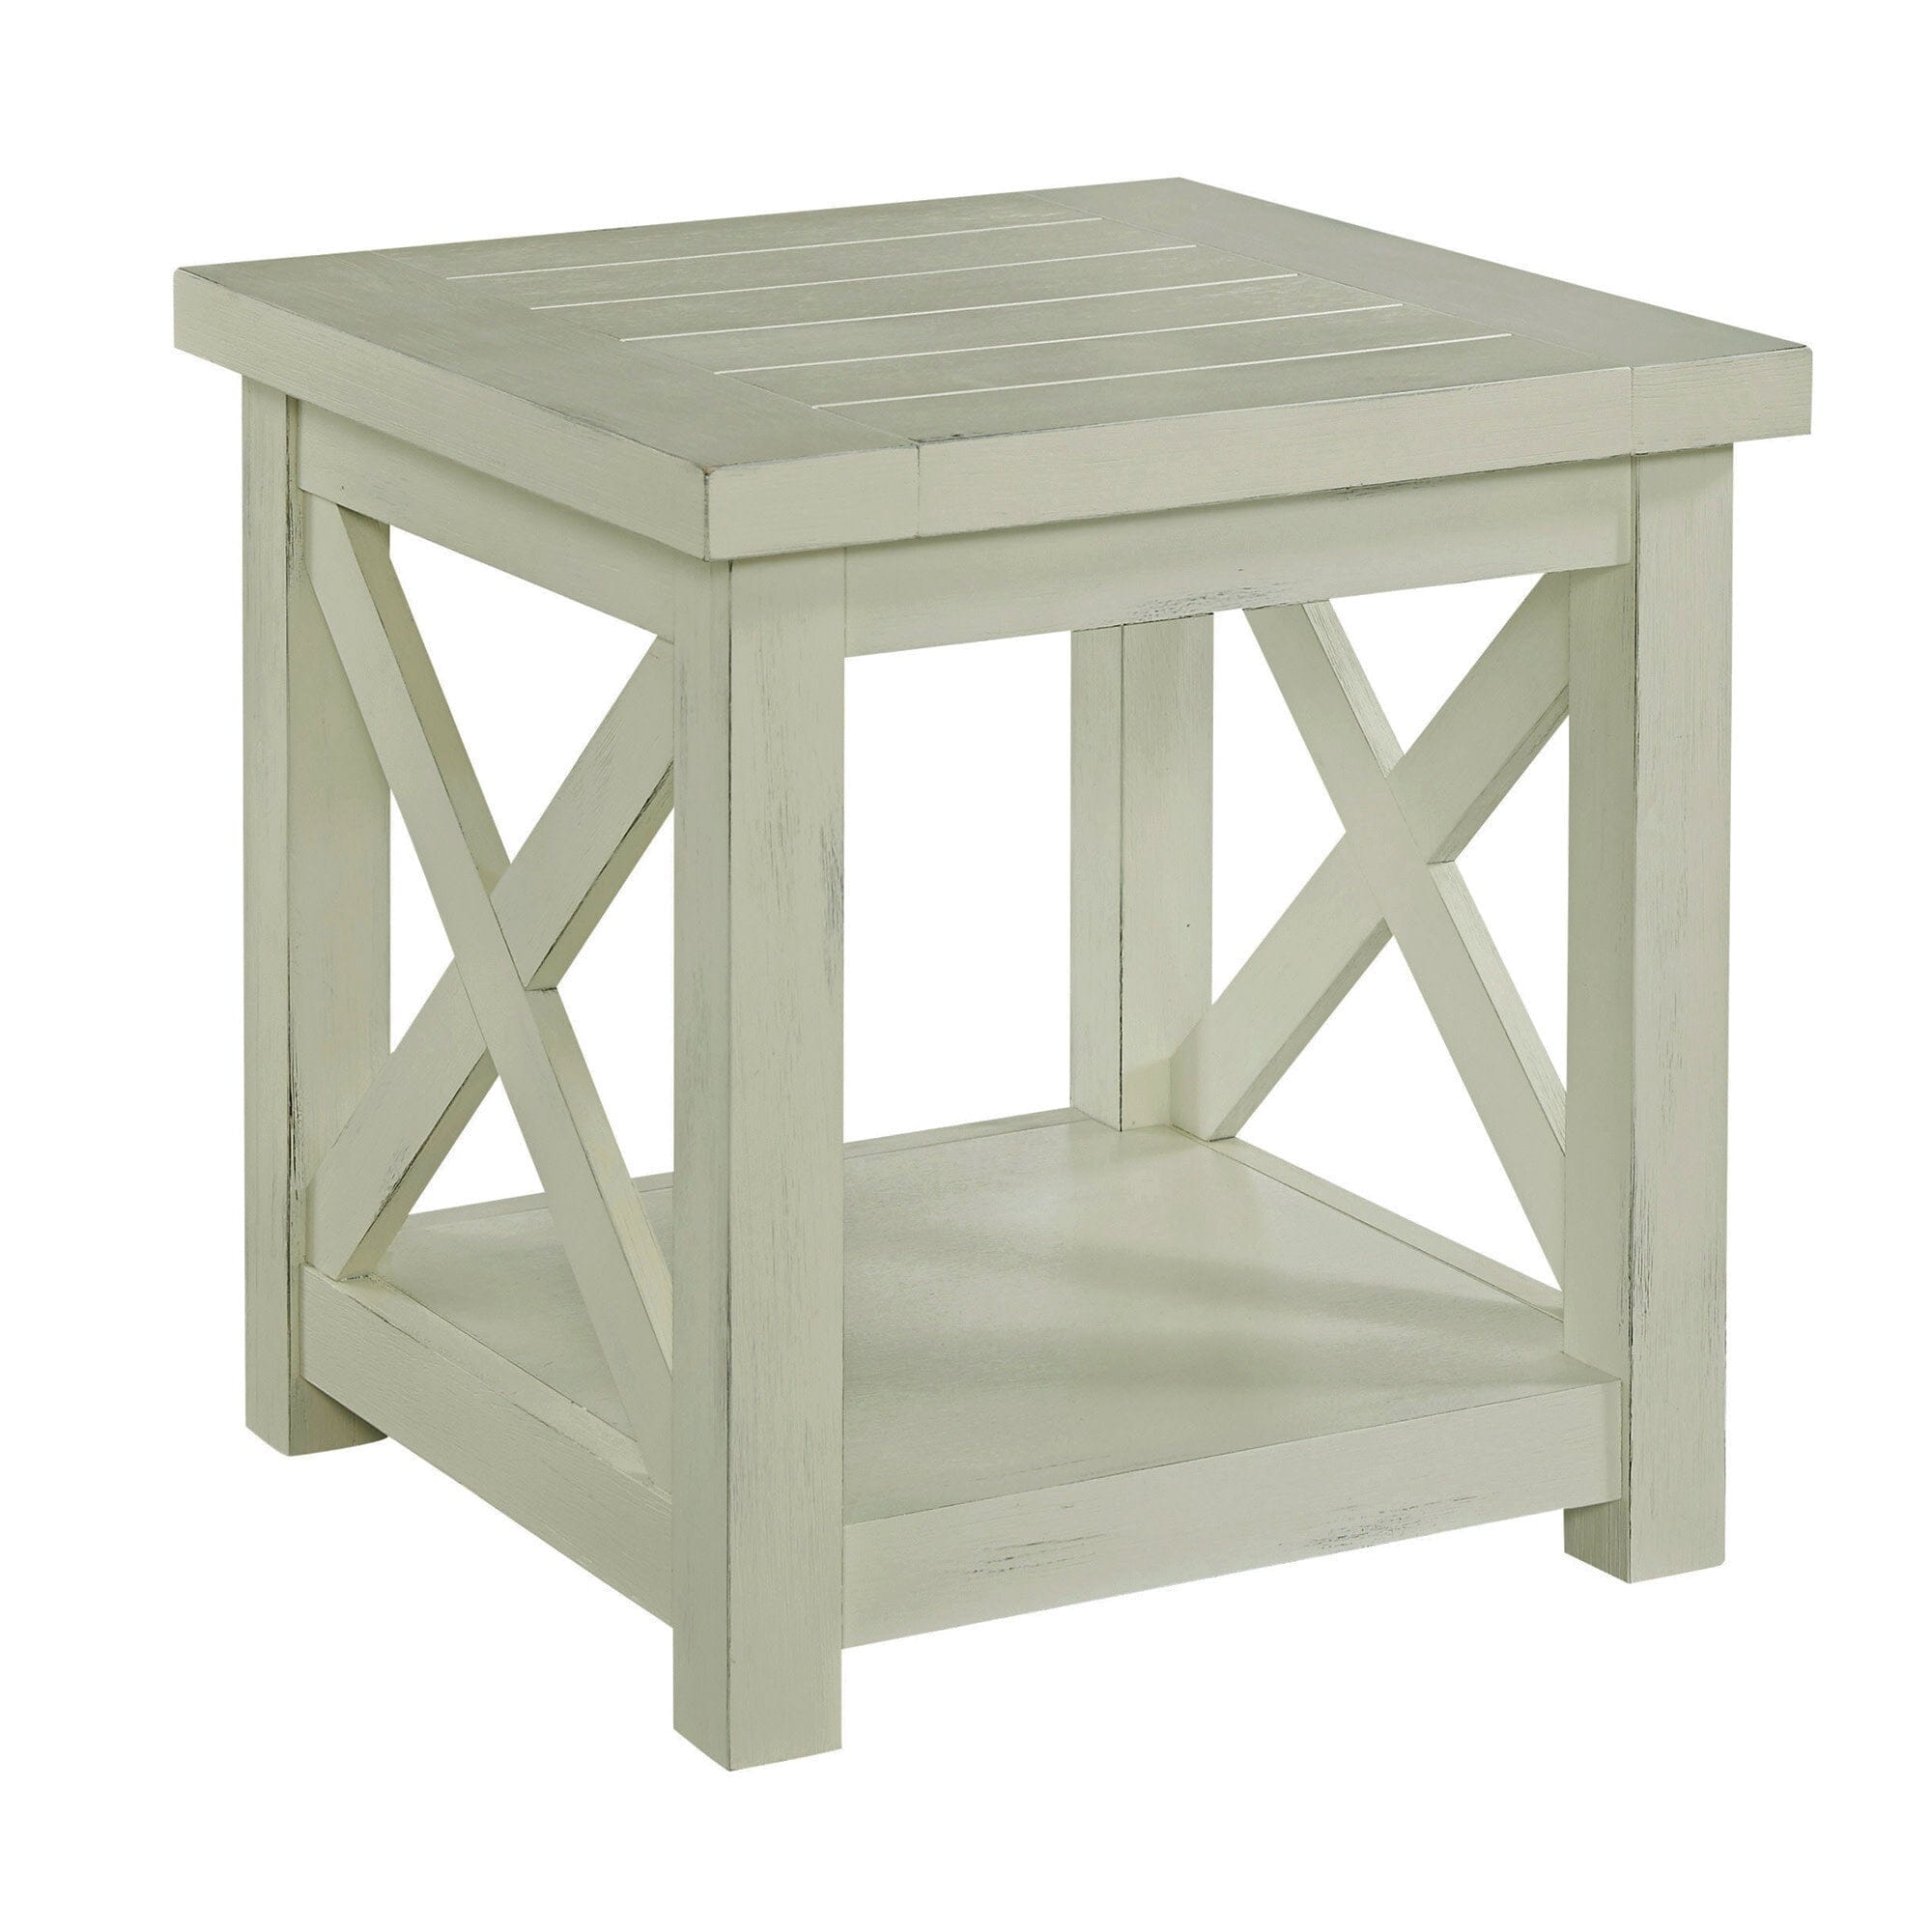 Traditional End Table By Seaside Lodge End Tables Seaside Lodge